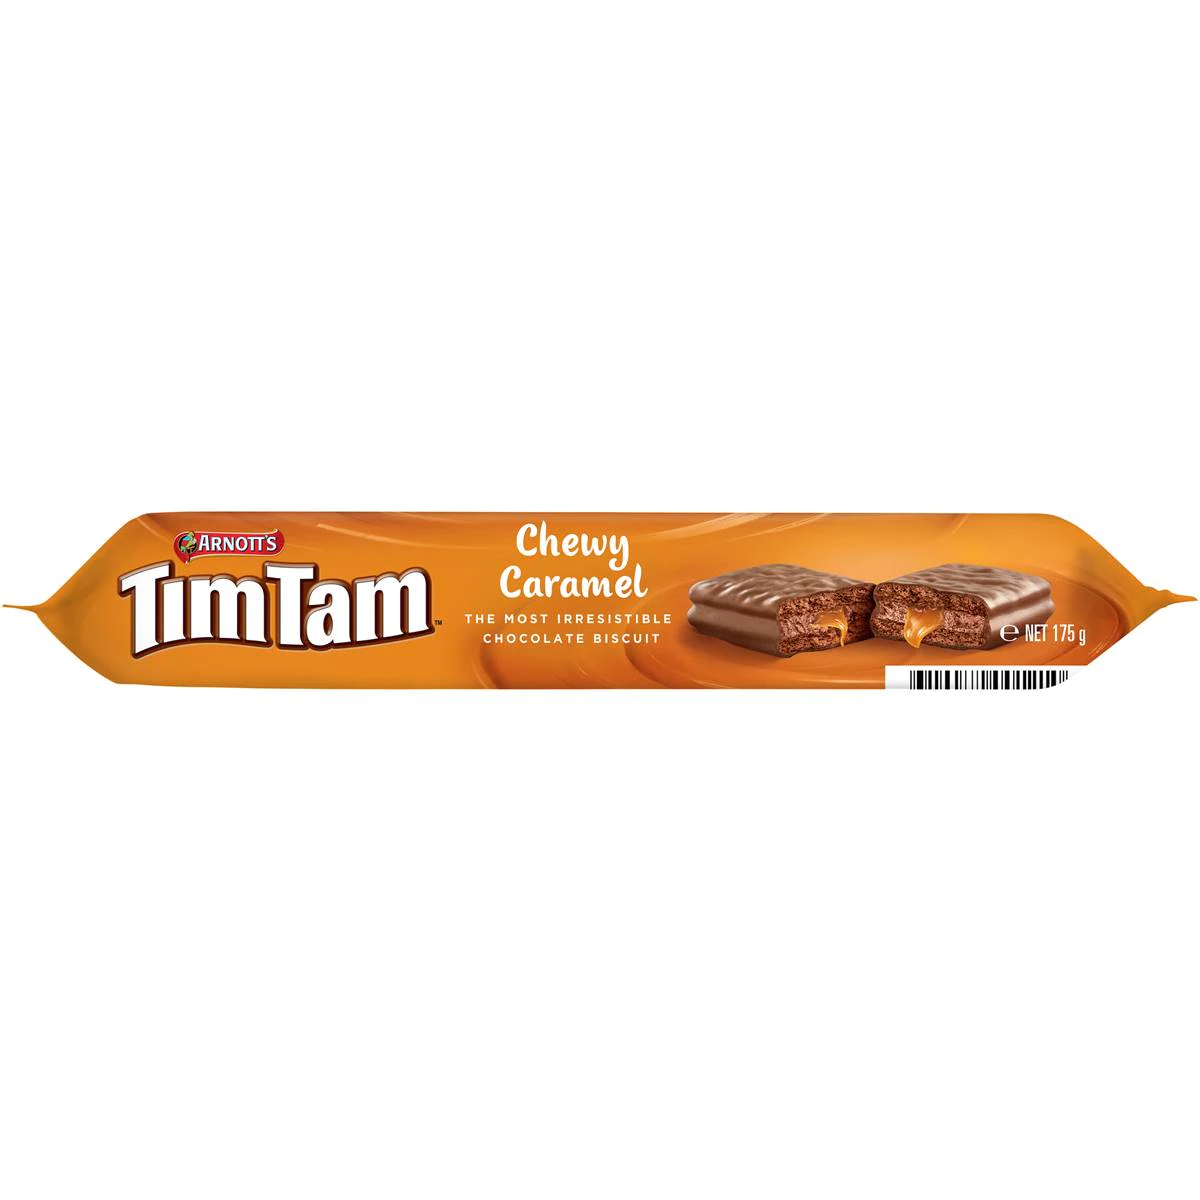 Arnott's Tim Tam Chocolate Biscuits, 175 Grams/6.2 Ounces, Chewy Caramel - image 5 of 6